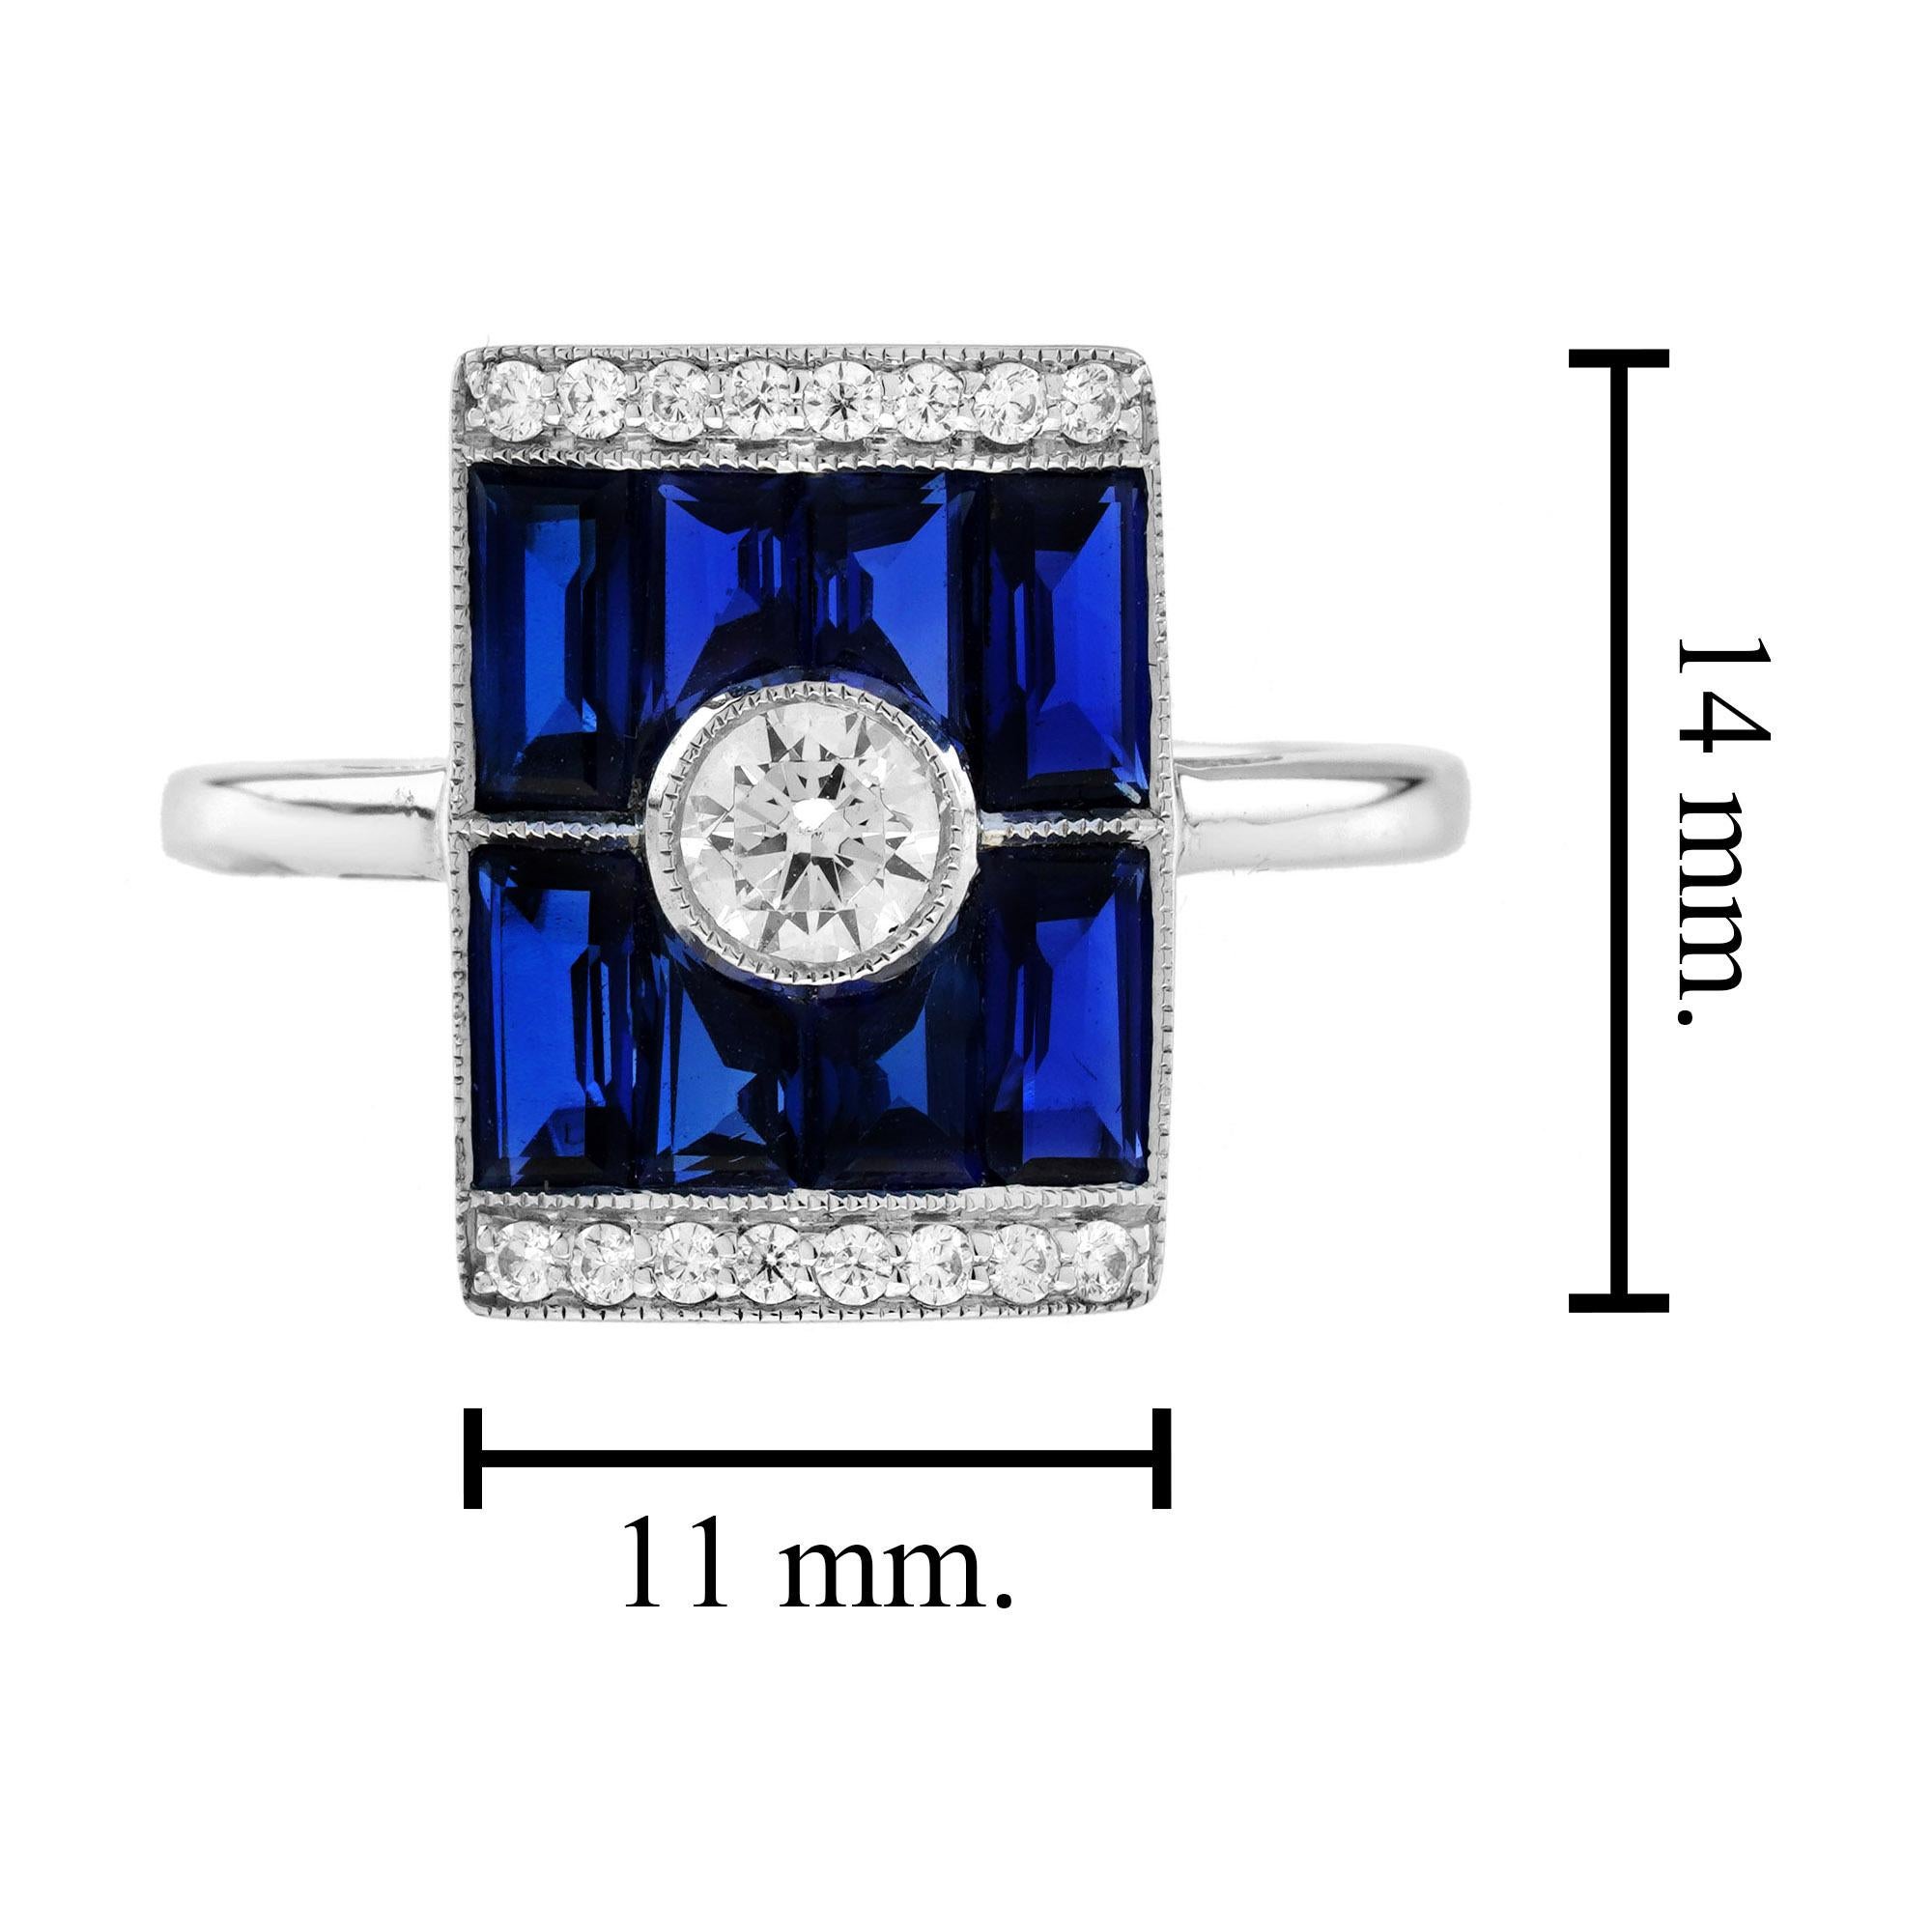 Diamond and Blue Sapphire Art Deco Style Rectangular Ring in 18K White Gold For Sale 2